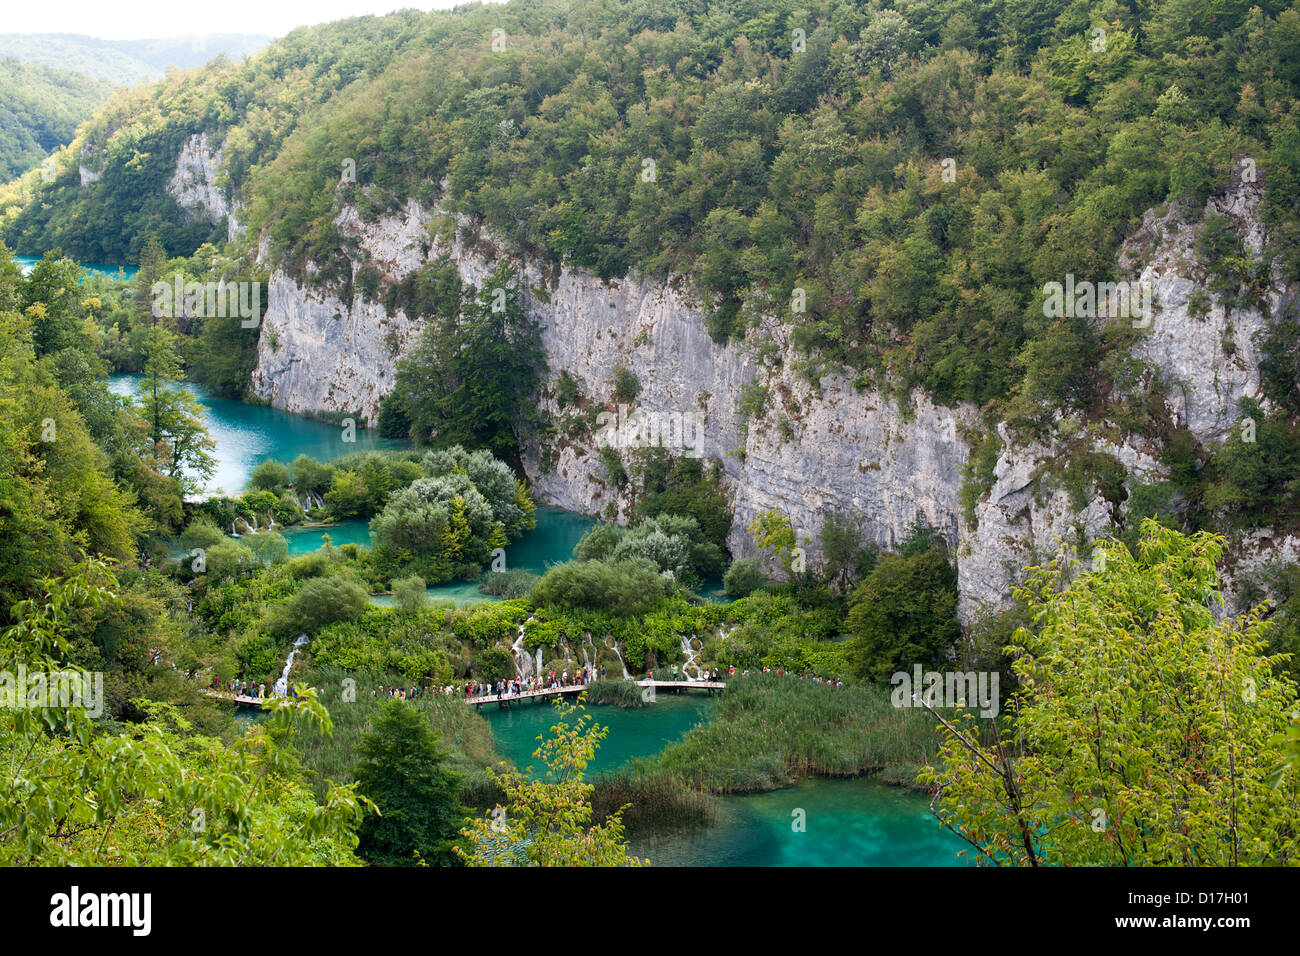 Tourists walking along wooden walkways in Plitvice Lakes National Park in Croatia. Stock Photo